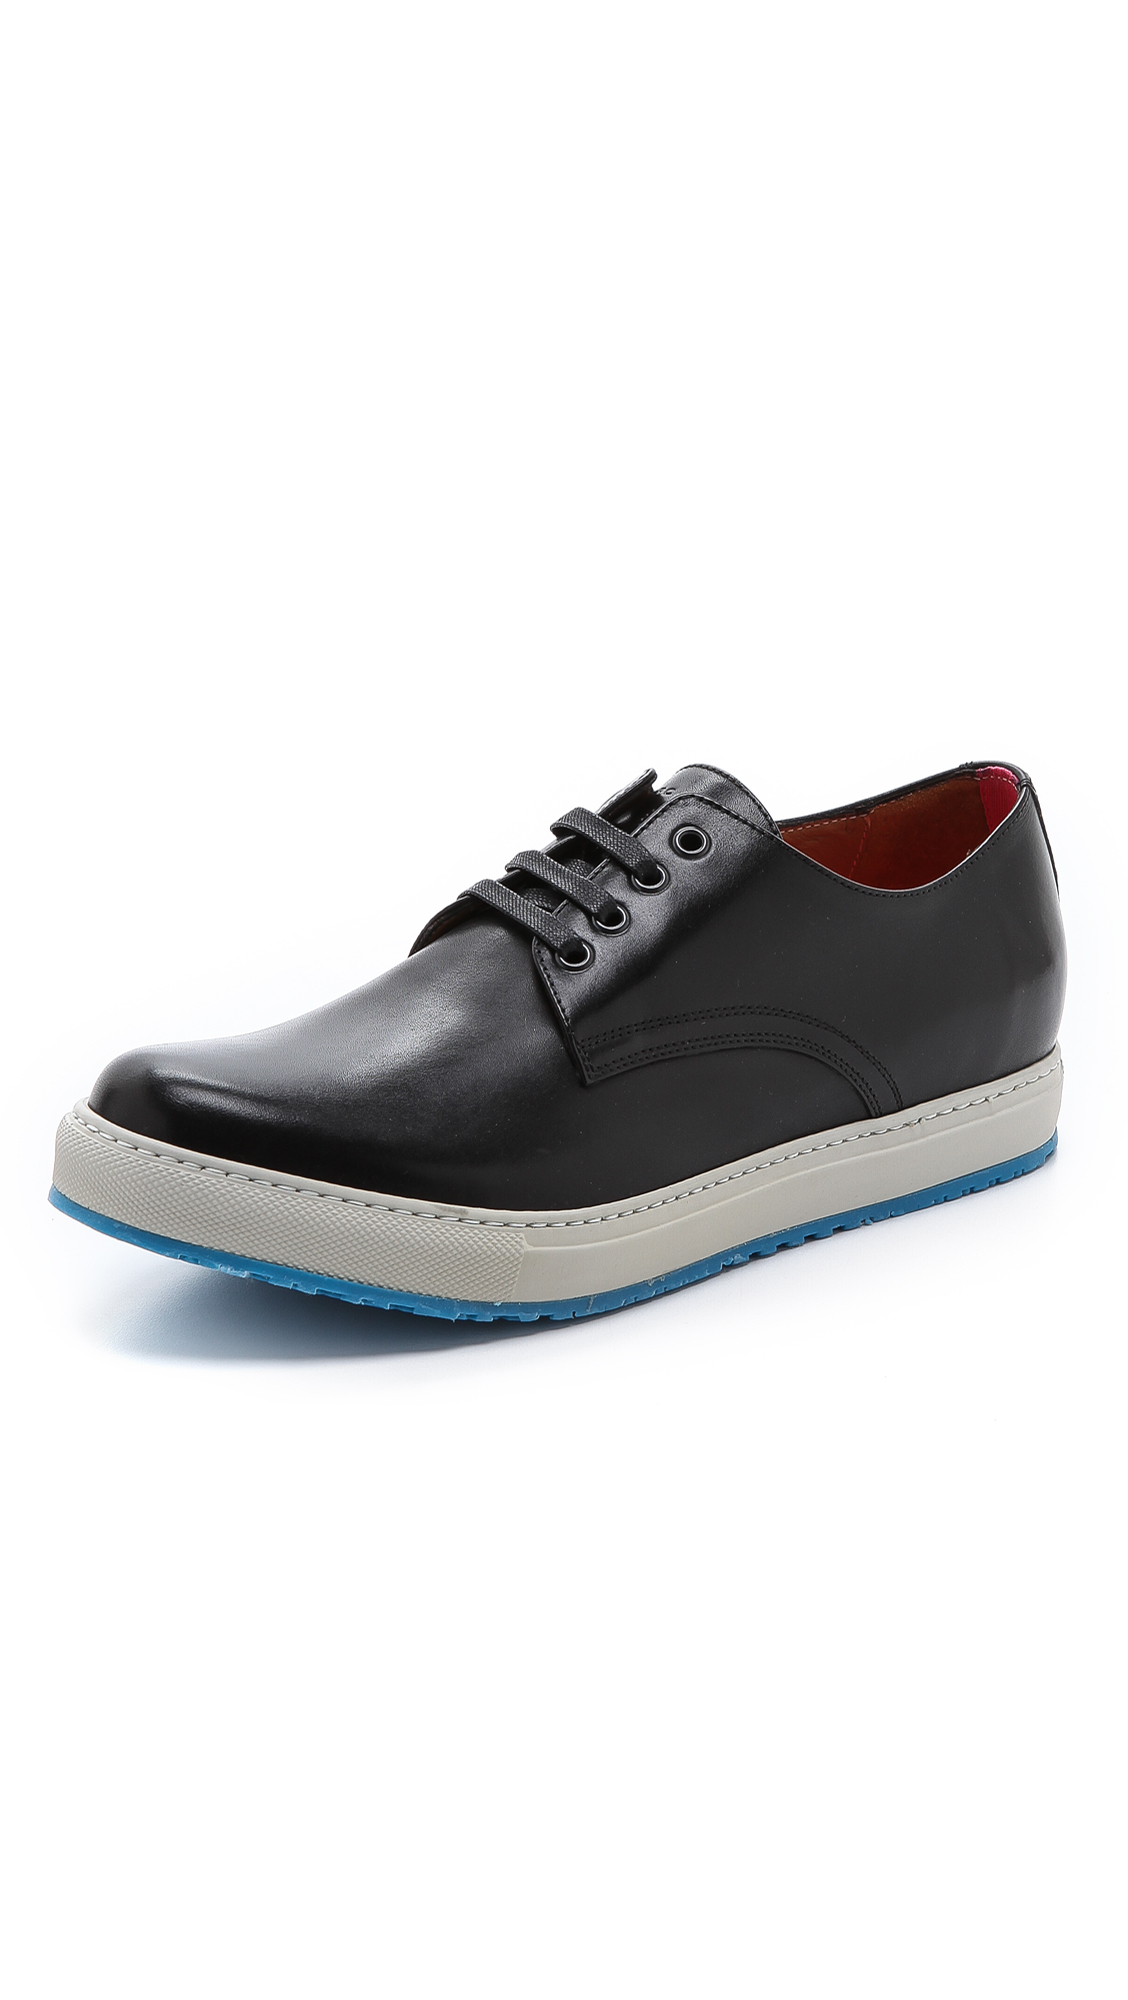 Lyst - Marc Jacobs White Sole Shoes in Black for Men